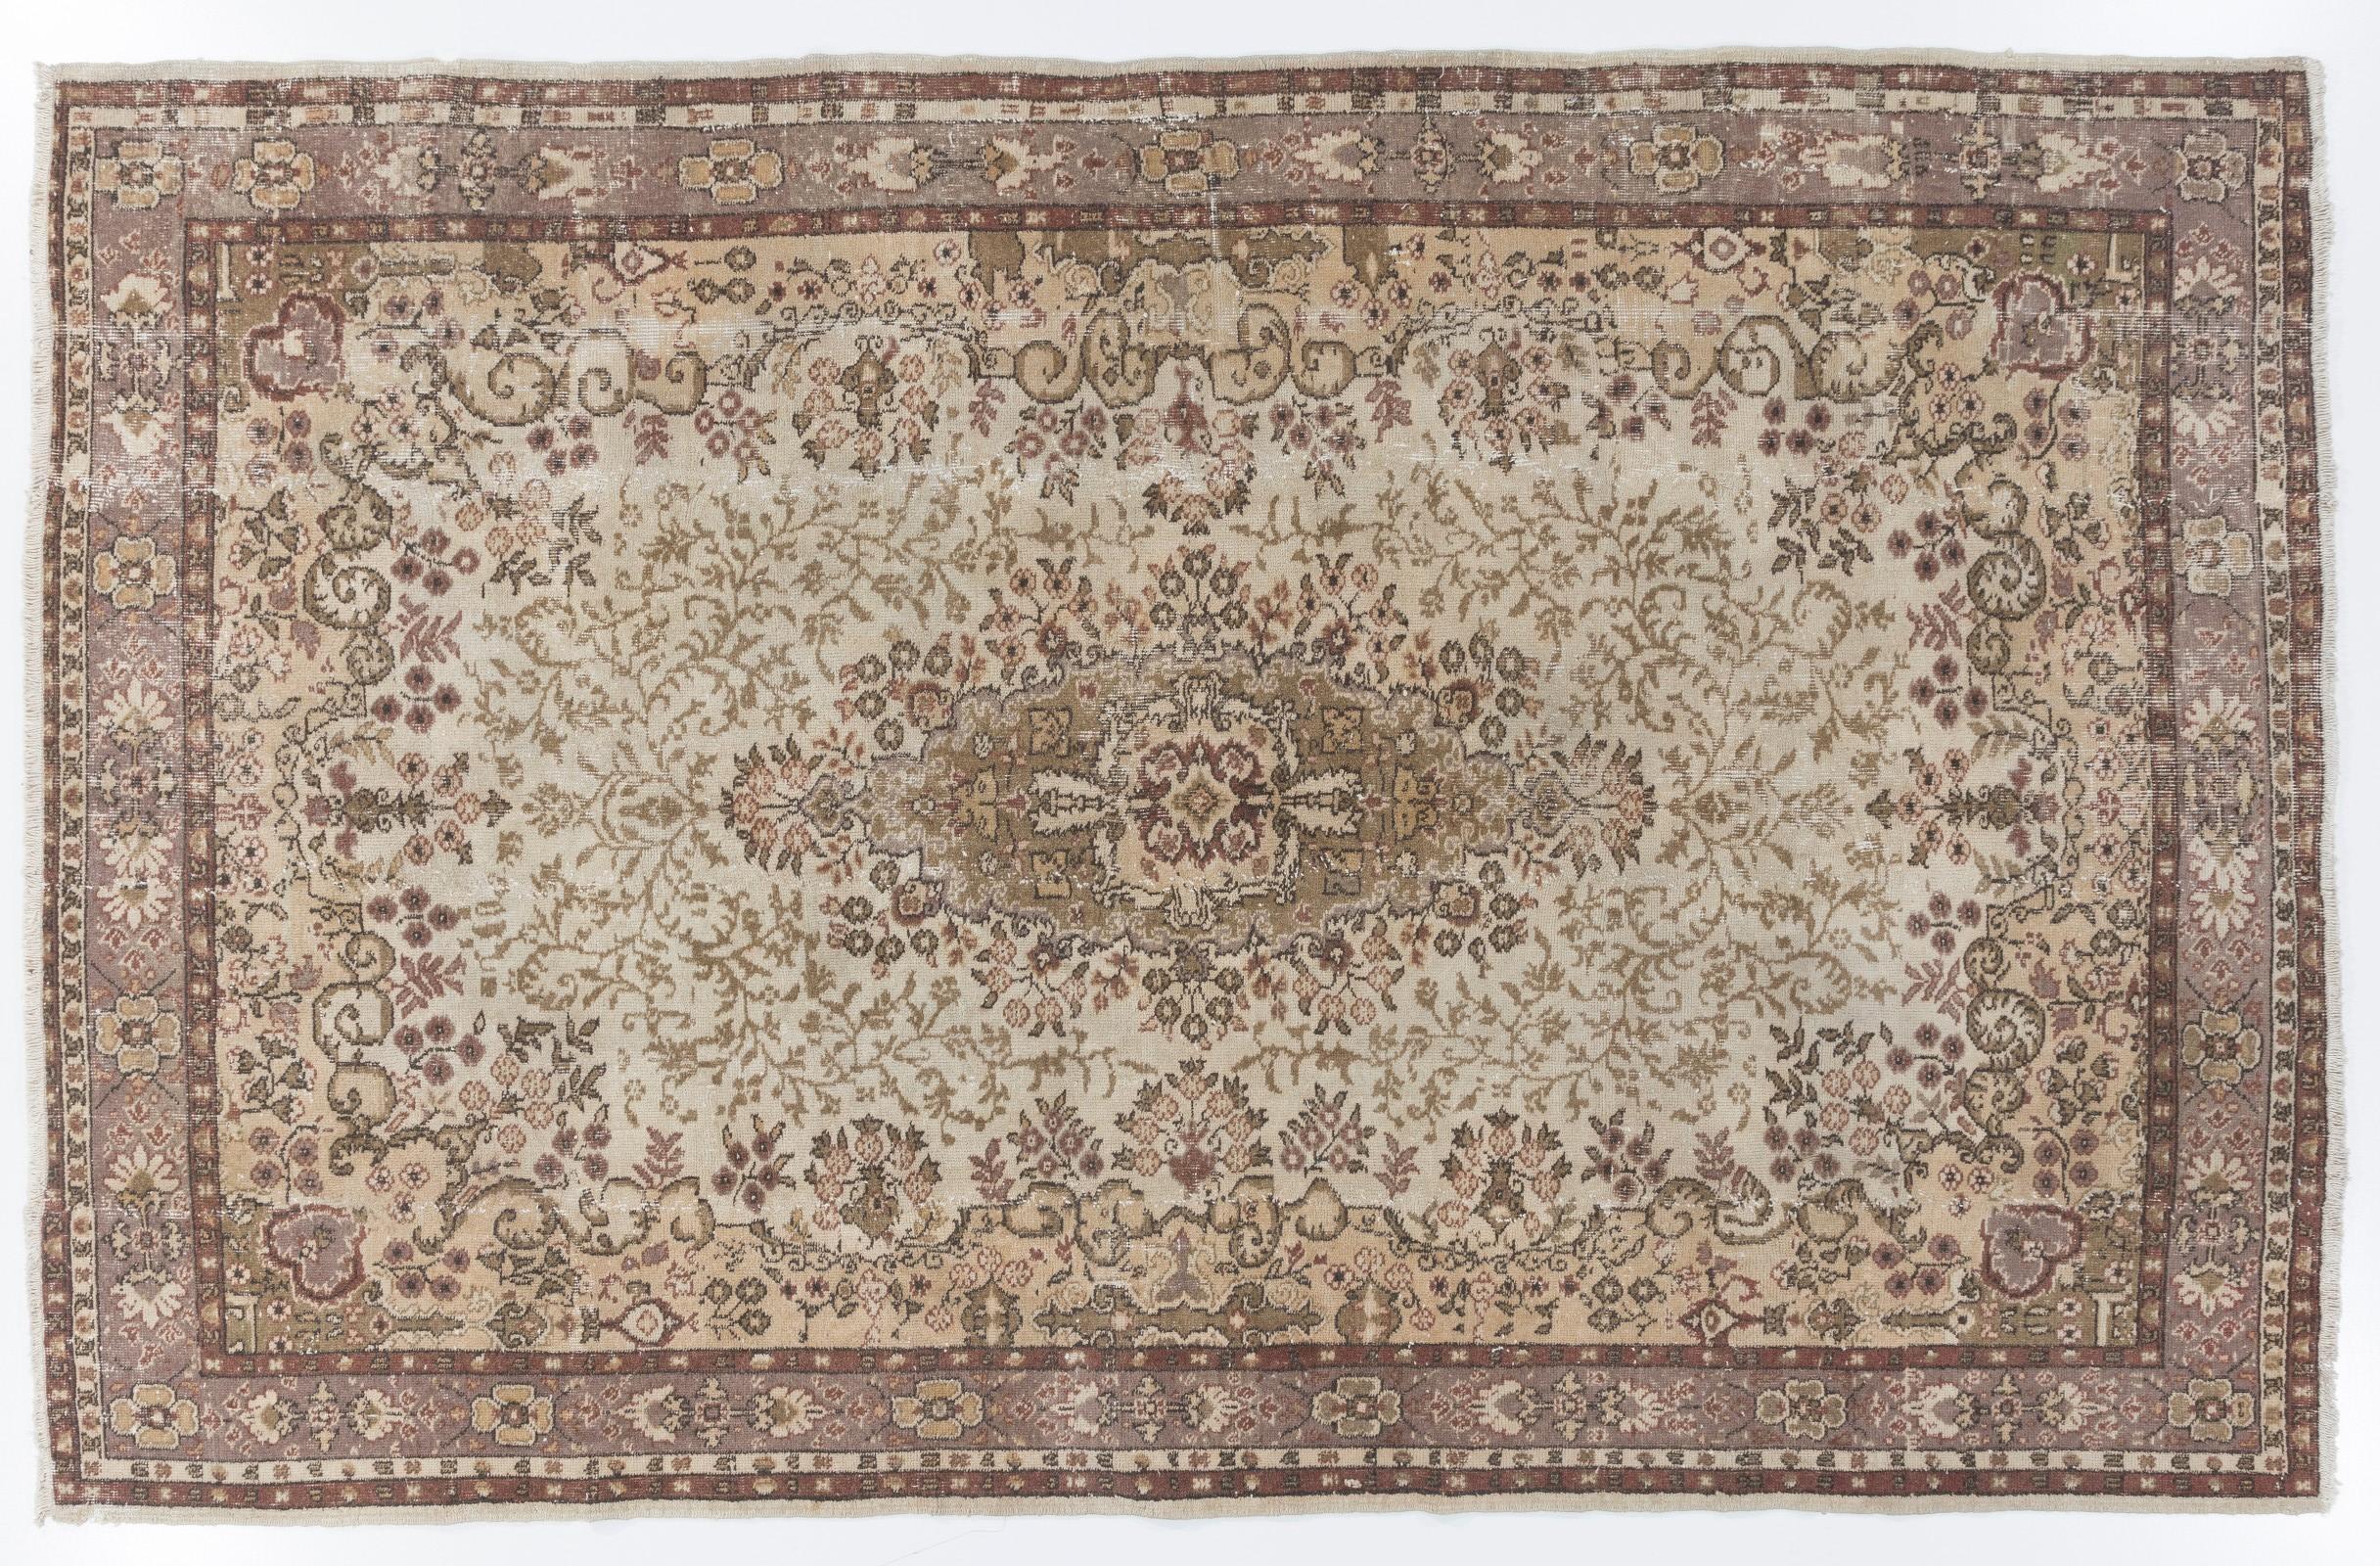 6.7 x 10.4 ft Vintage Oushak Rug Made in Turkey, Ca 1950, Beige Floor Covering In Good Condition For Sale In Philadelphia, PA